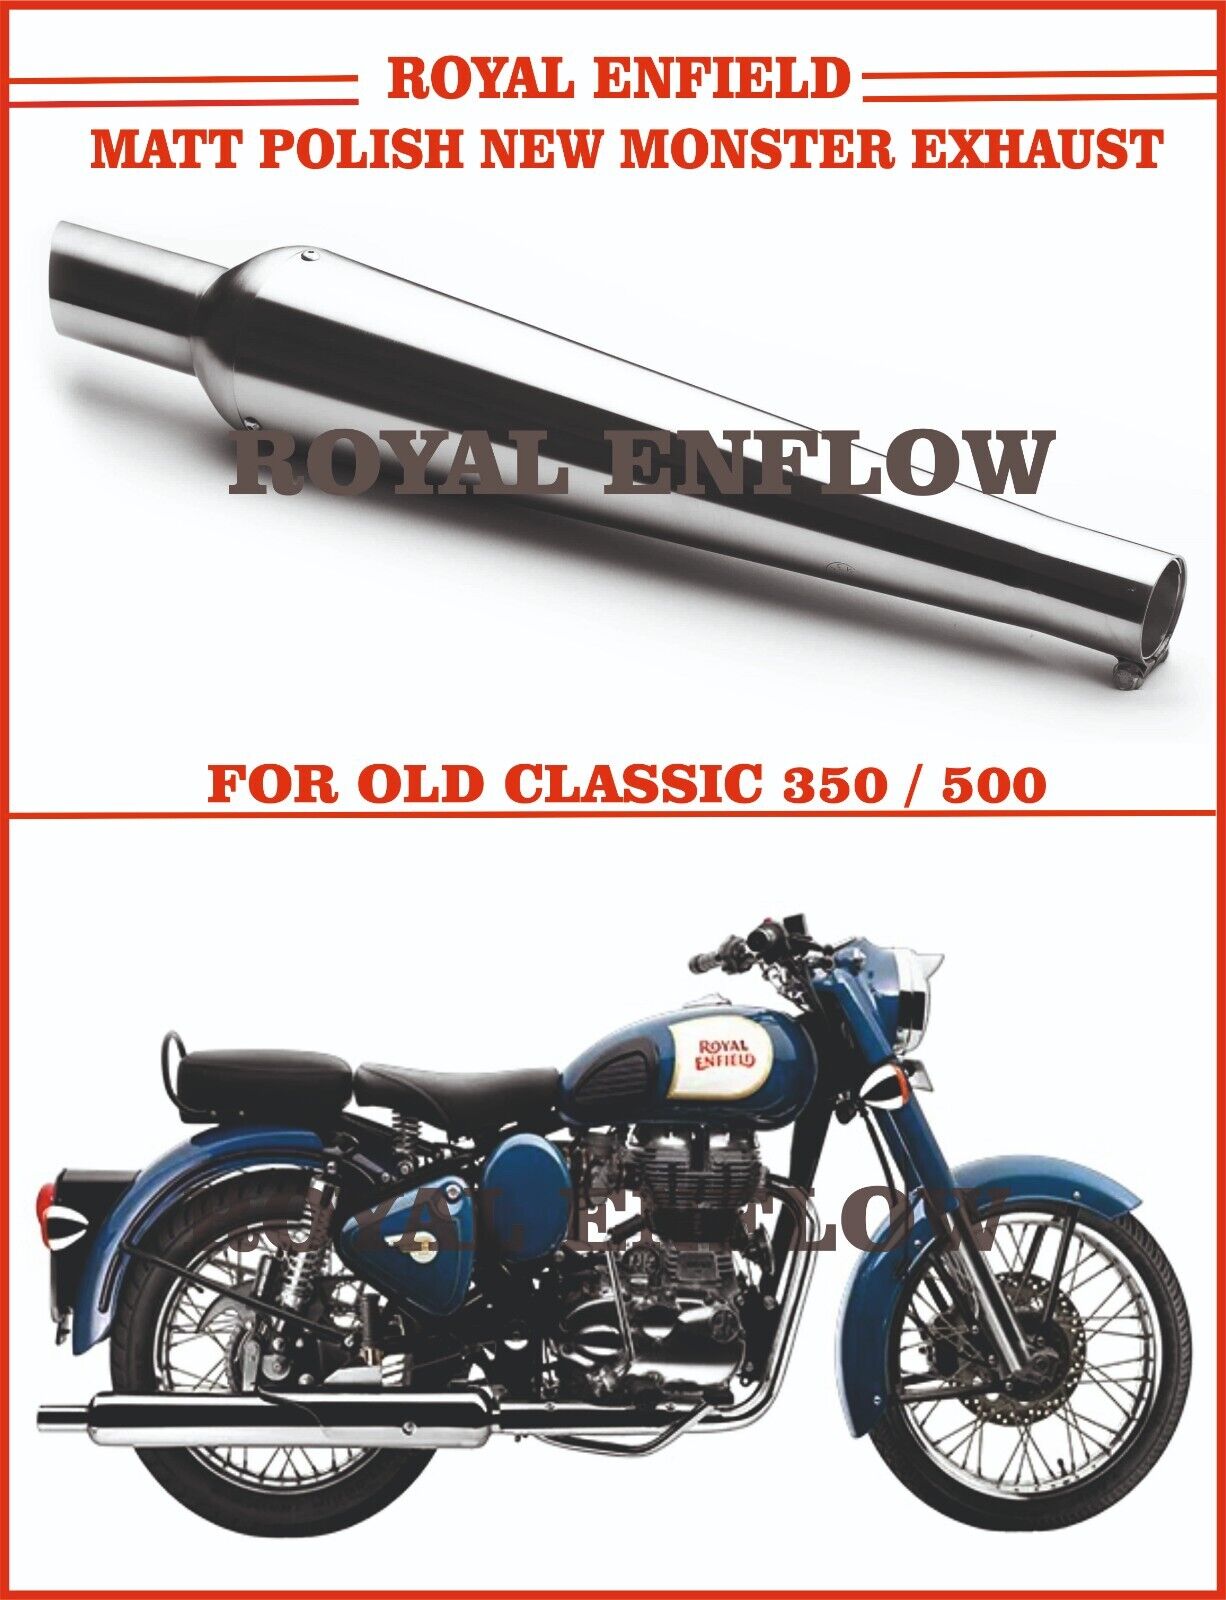 Royal Enfield Matt Polish New Monster Exhaust for Old Classic 350/500 - Exp Ship